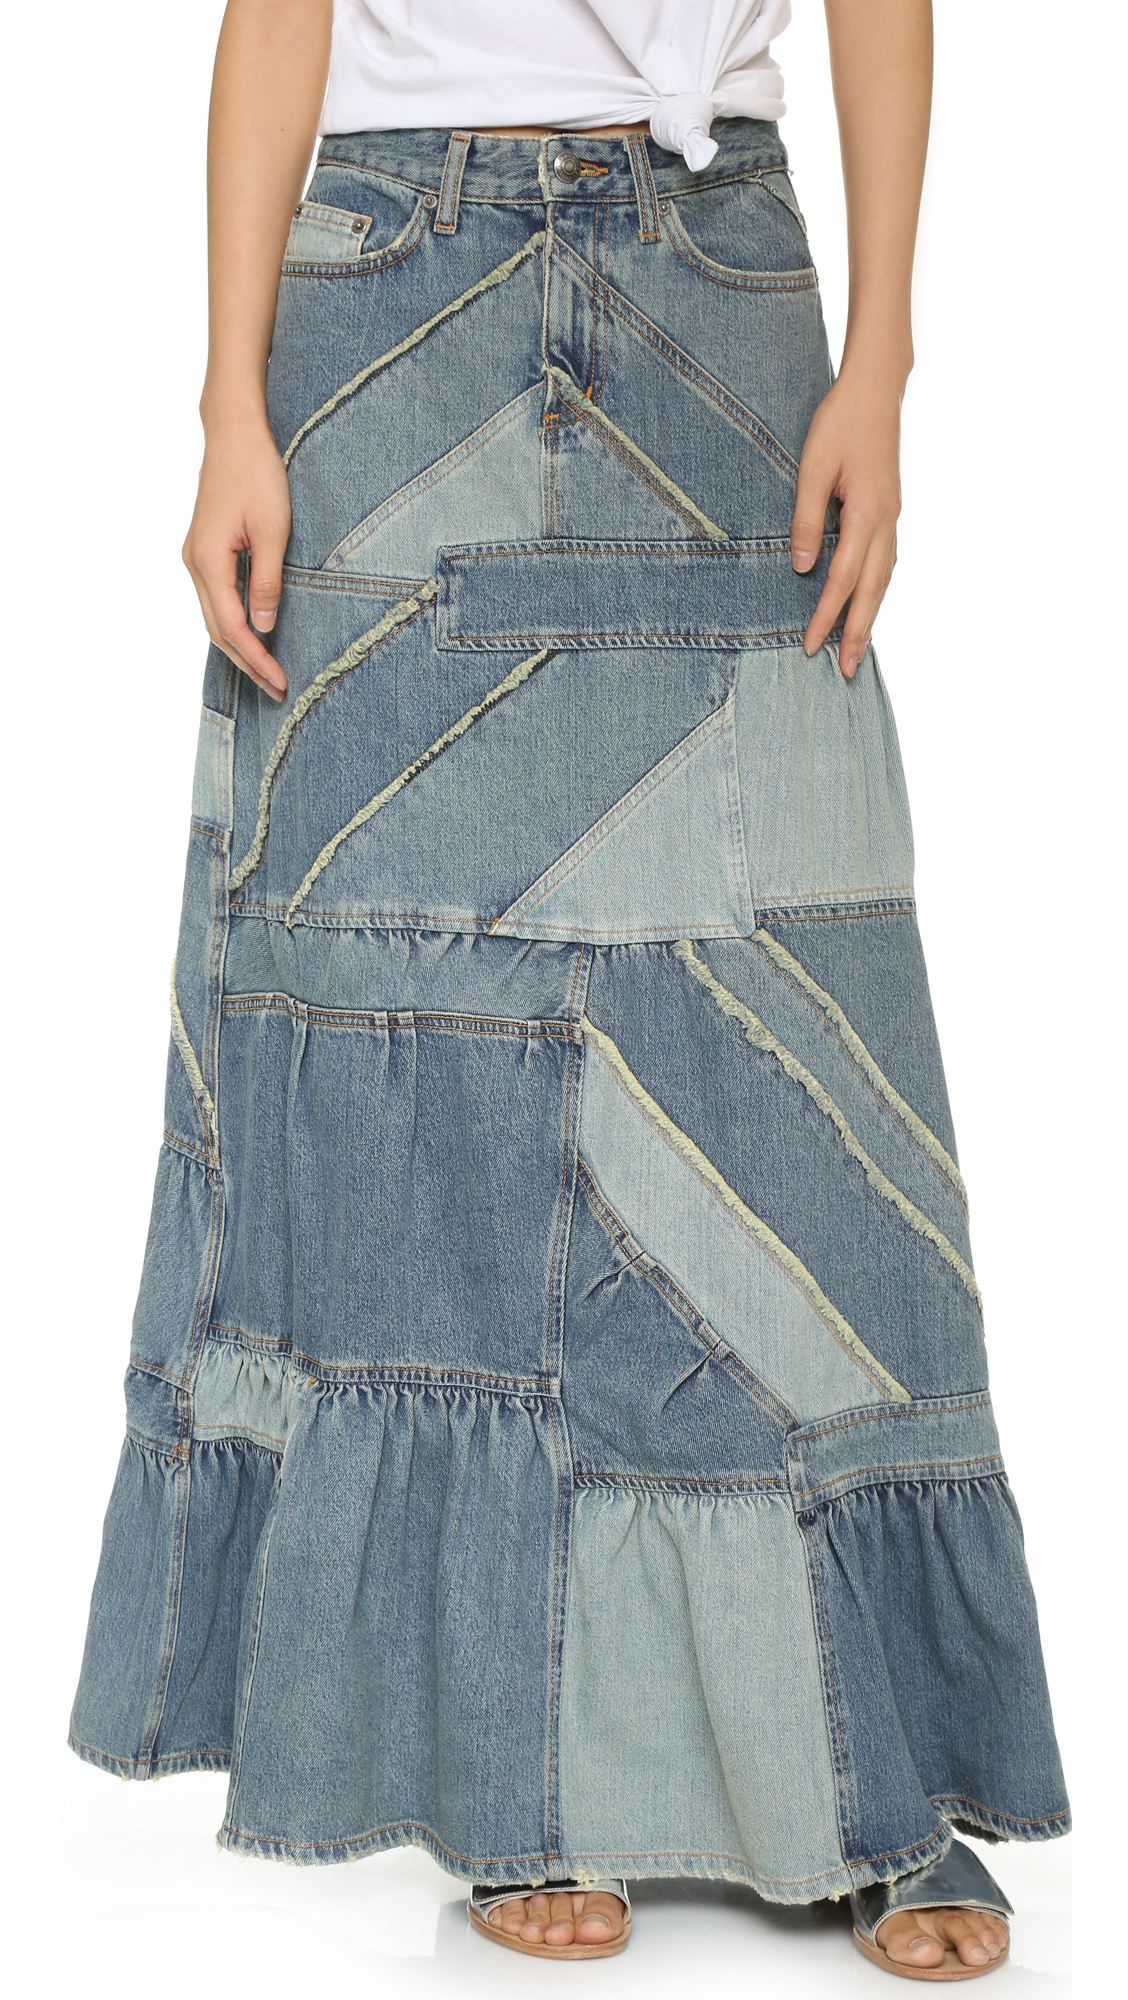 Marc By Marc Jacobs Patchwork Denim Skirt in Blue | Lyst